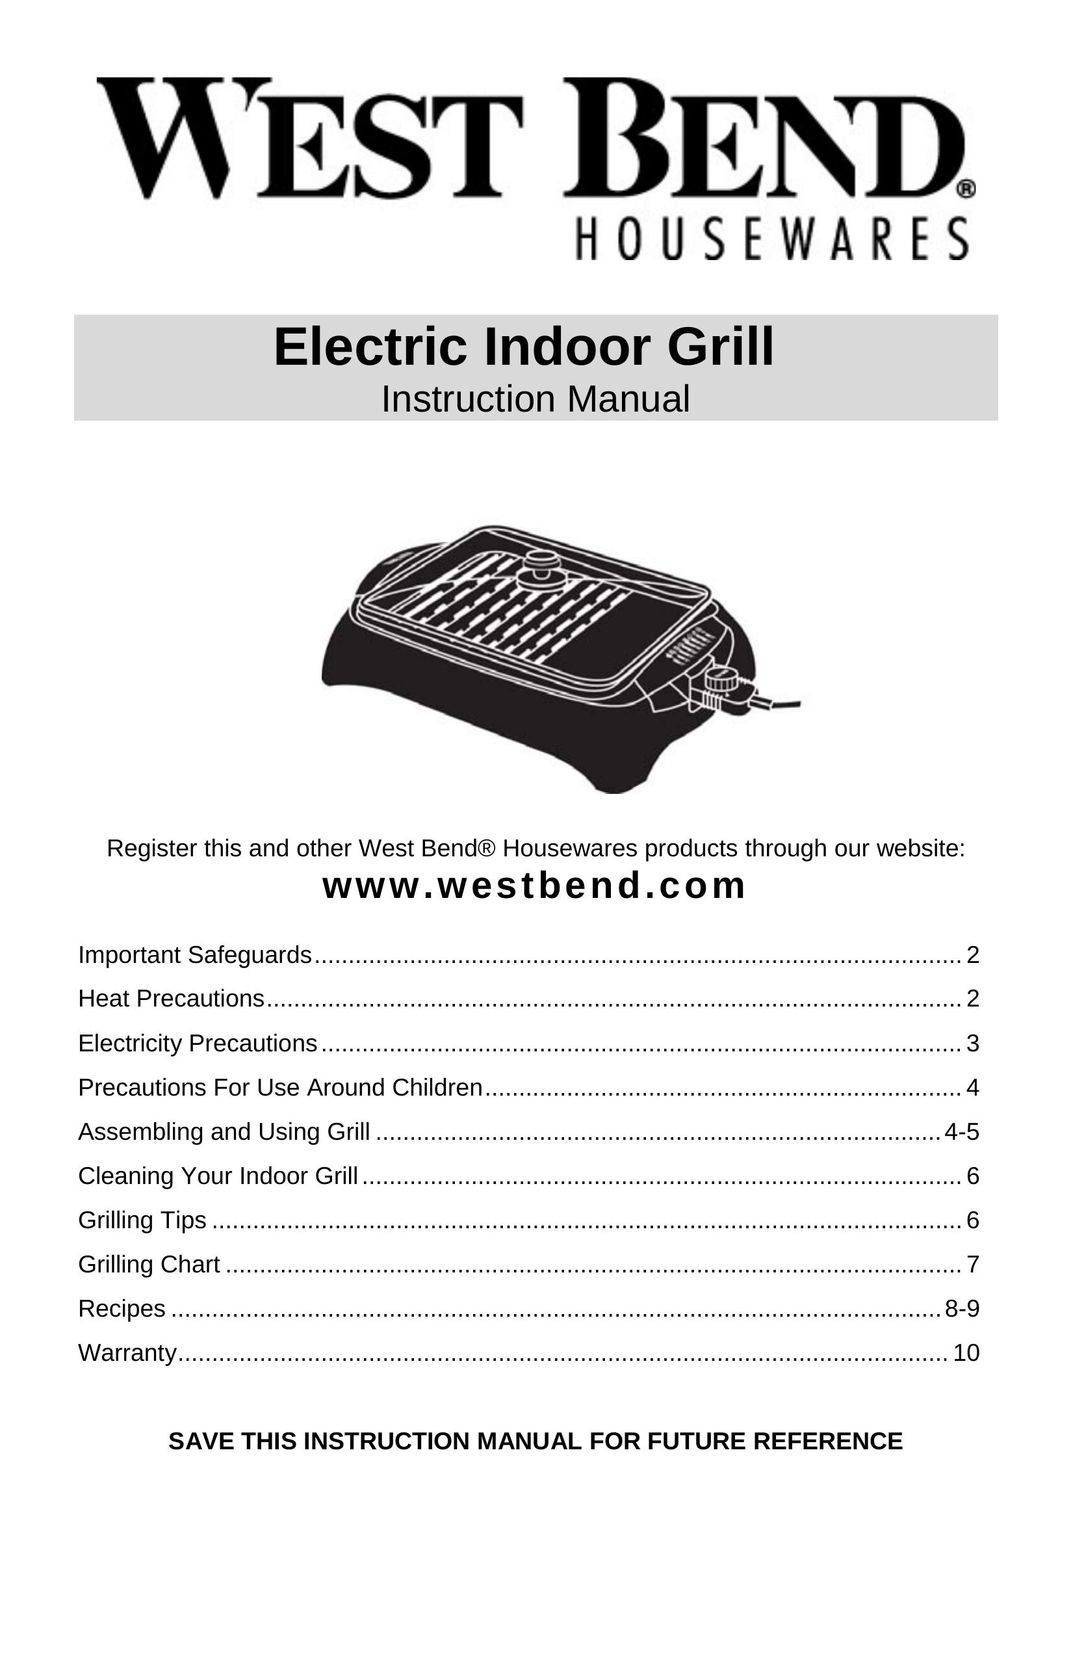 West Bend Electric Indoor Grill Kitchen Grill User Manual